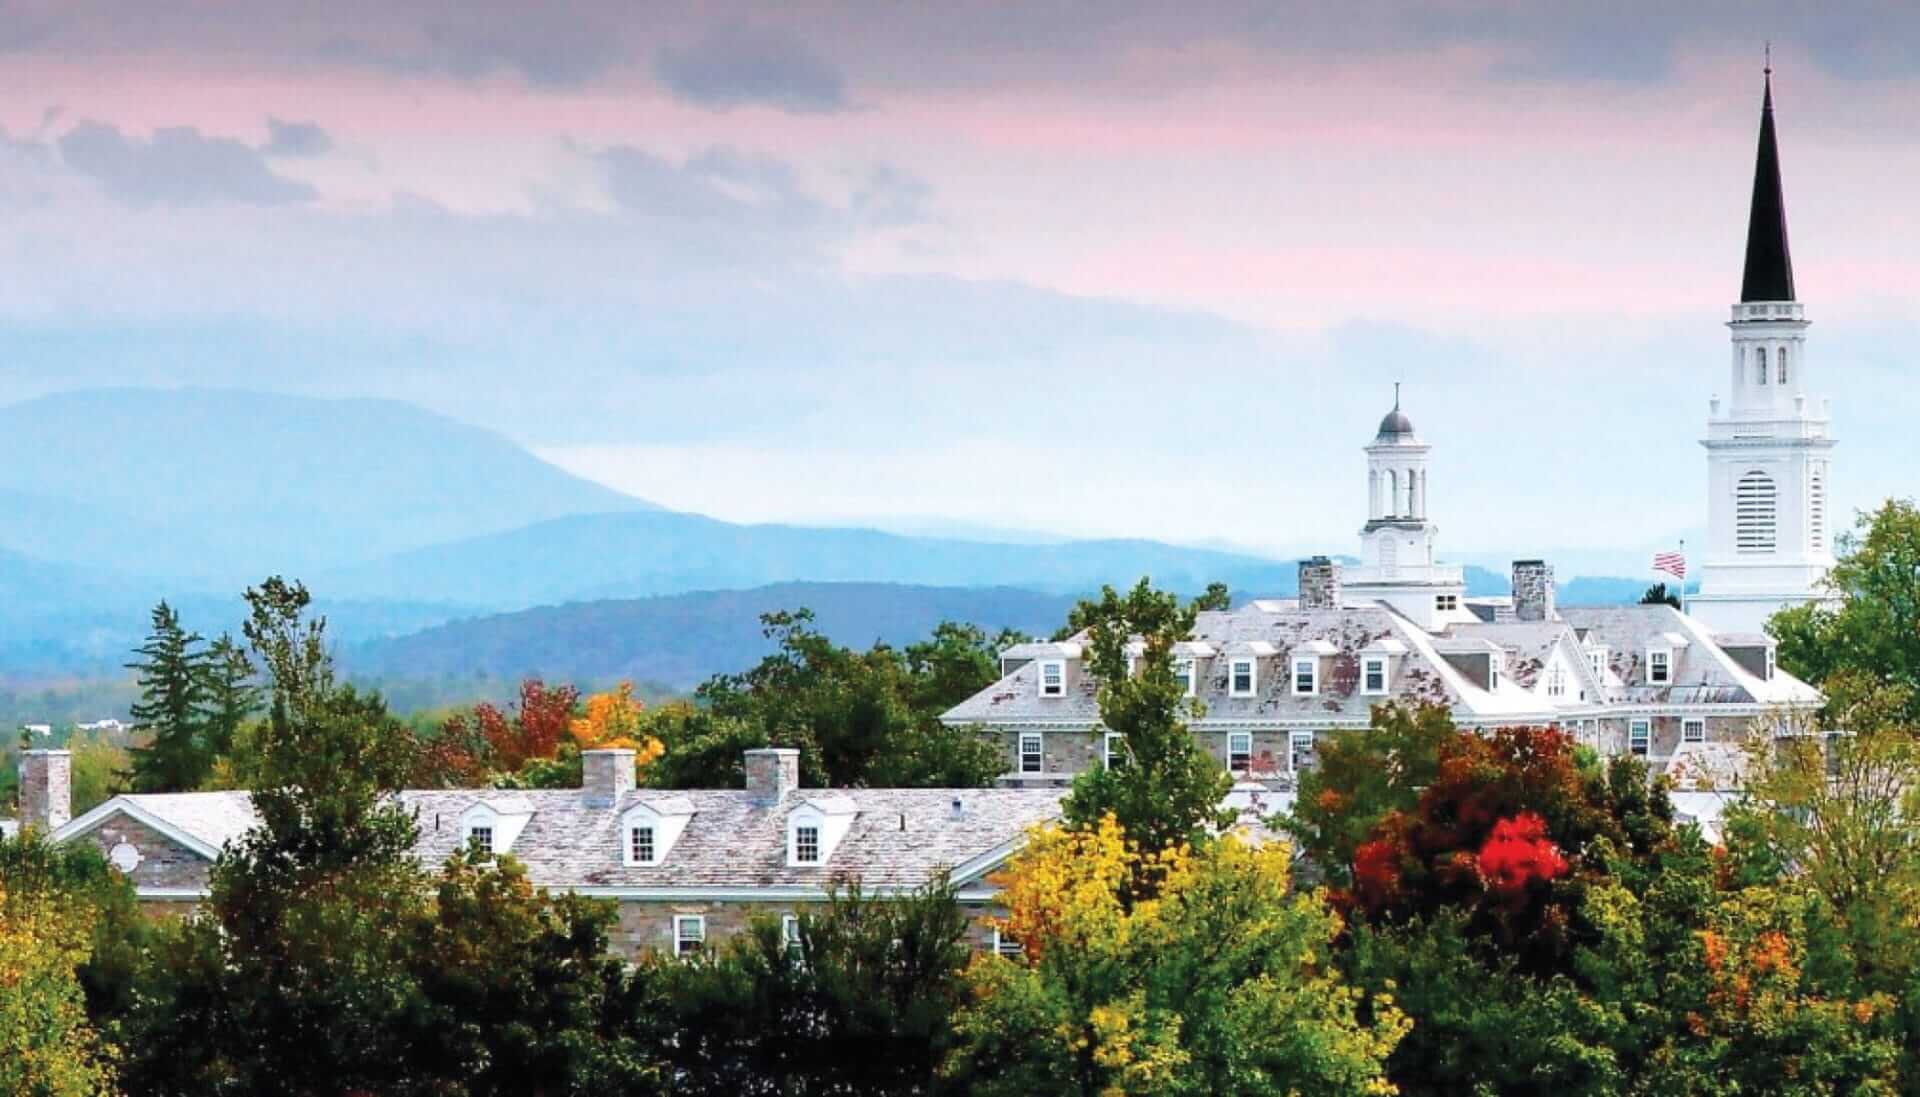 Middlebury College in Middlebury VT with mountain backdrop